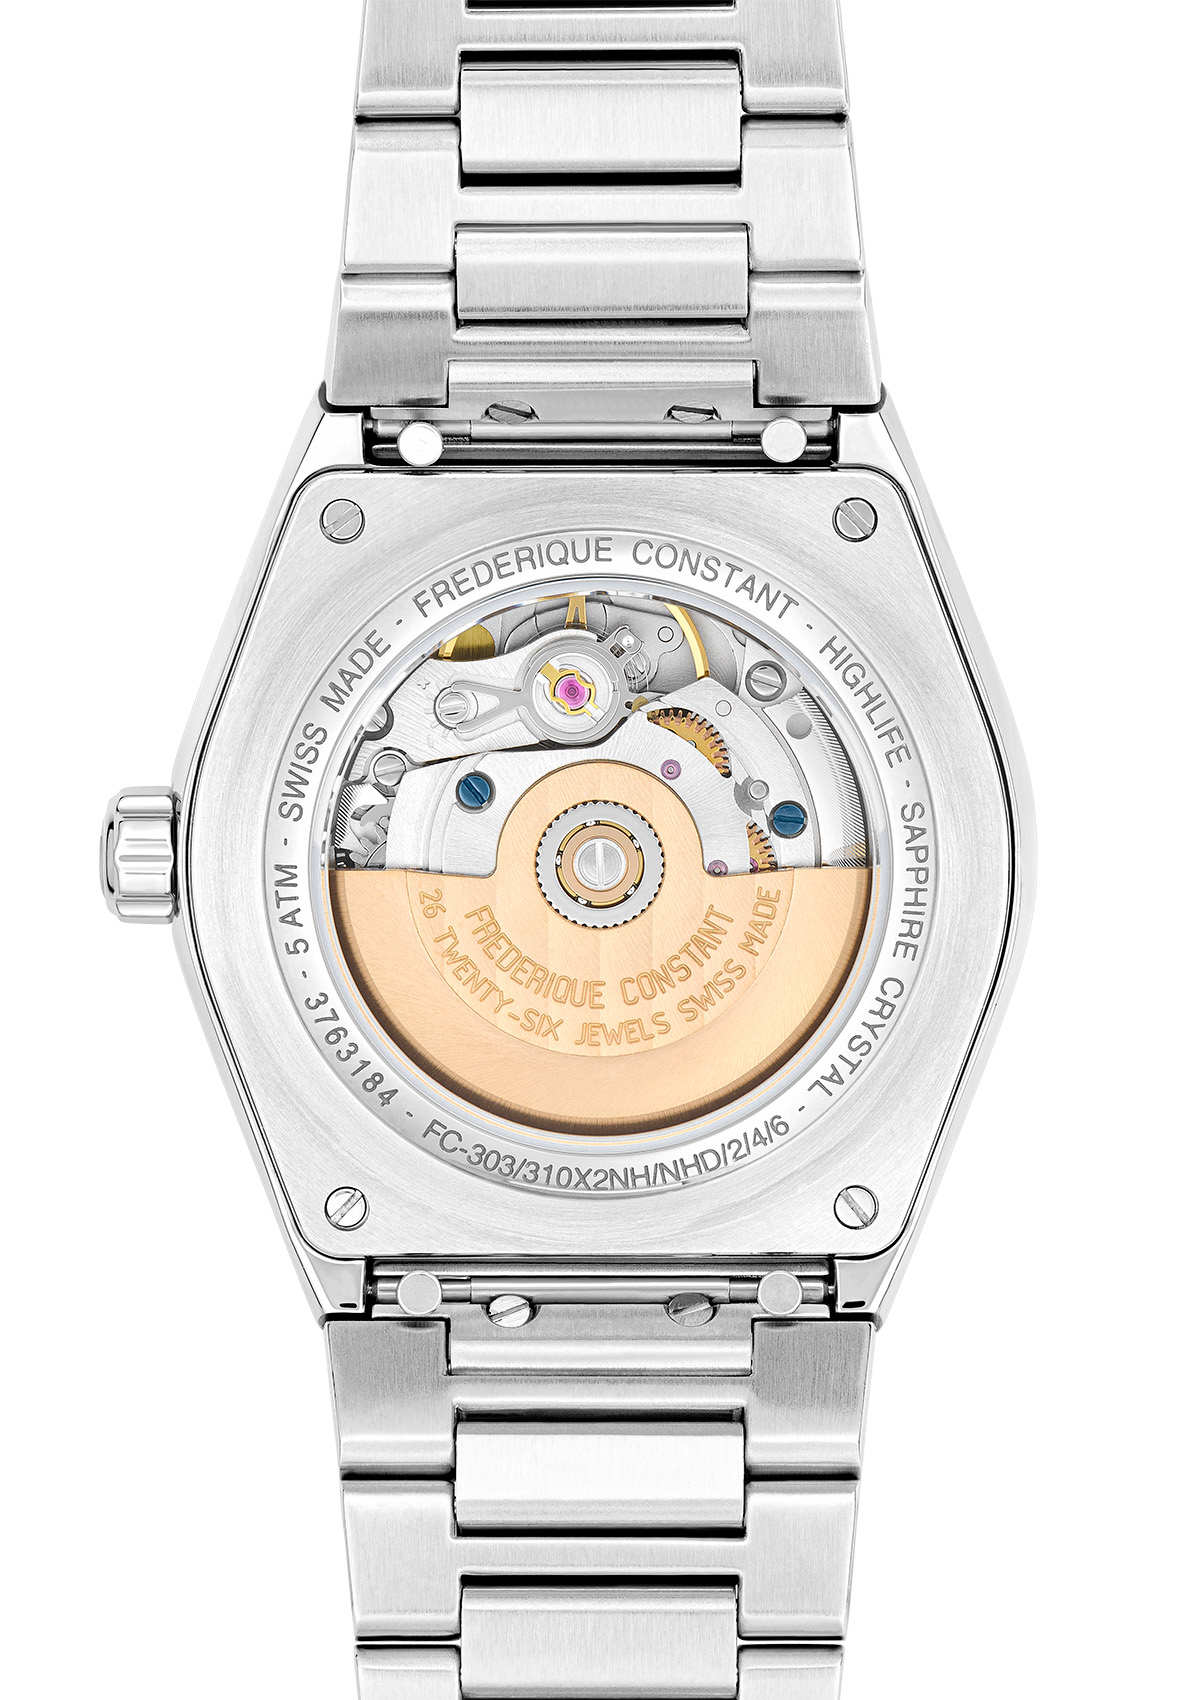 Frederique Constant Presents Its New Highlife Ladies Automatic Watch - A Touch Of Pop